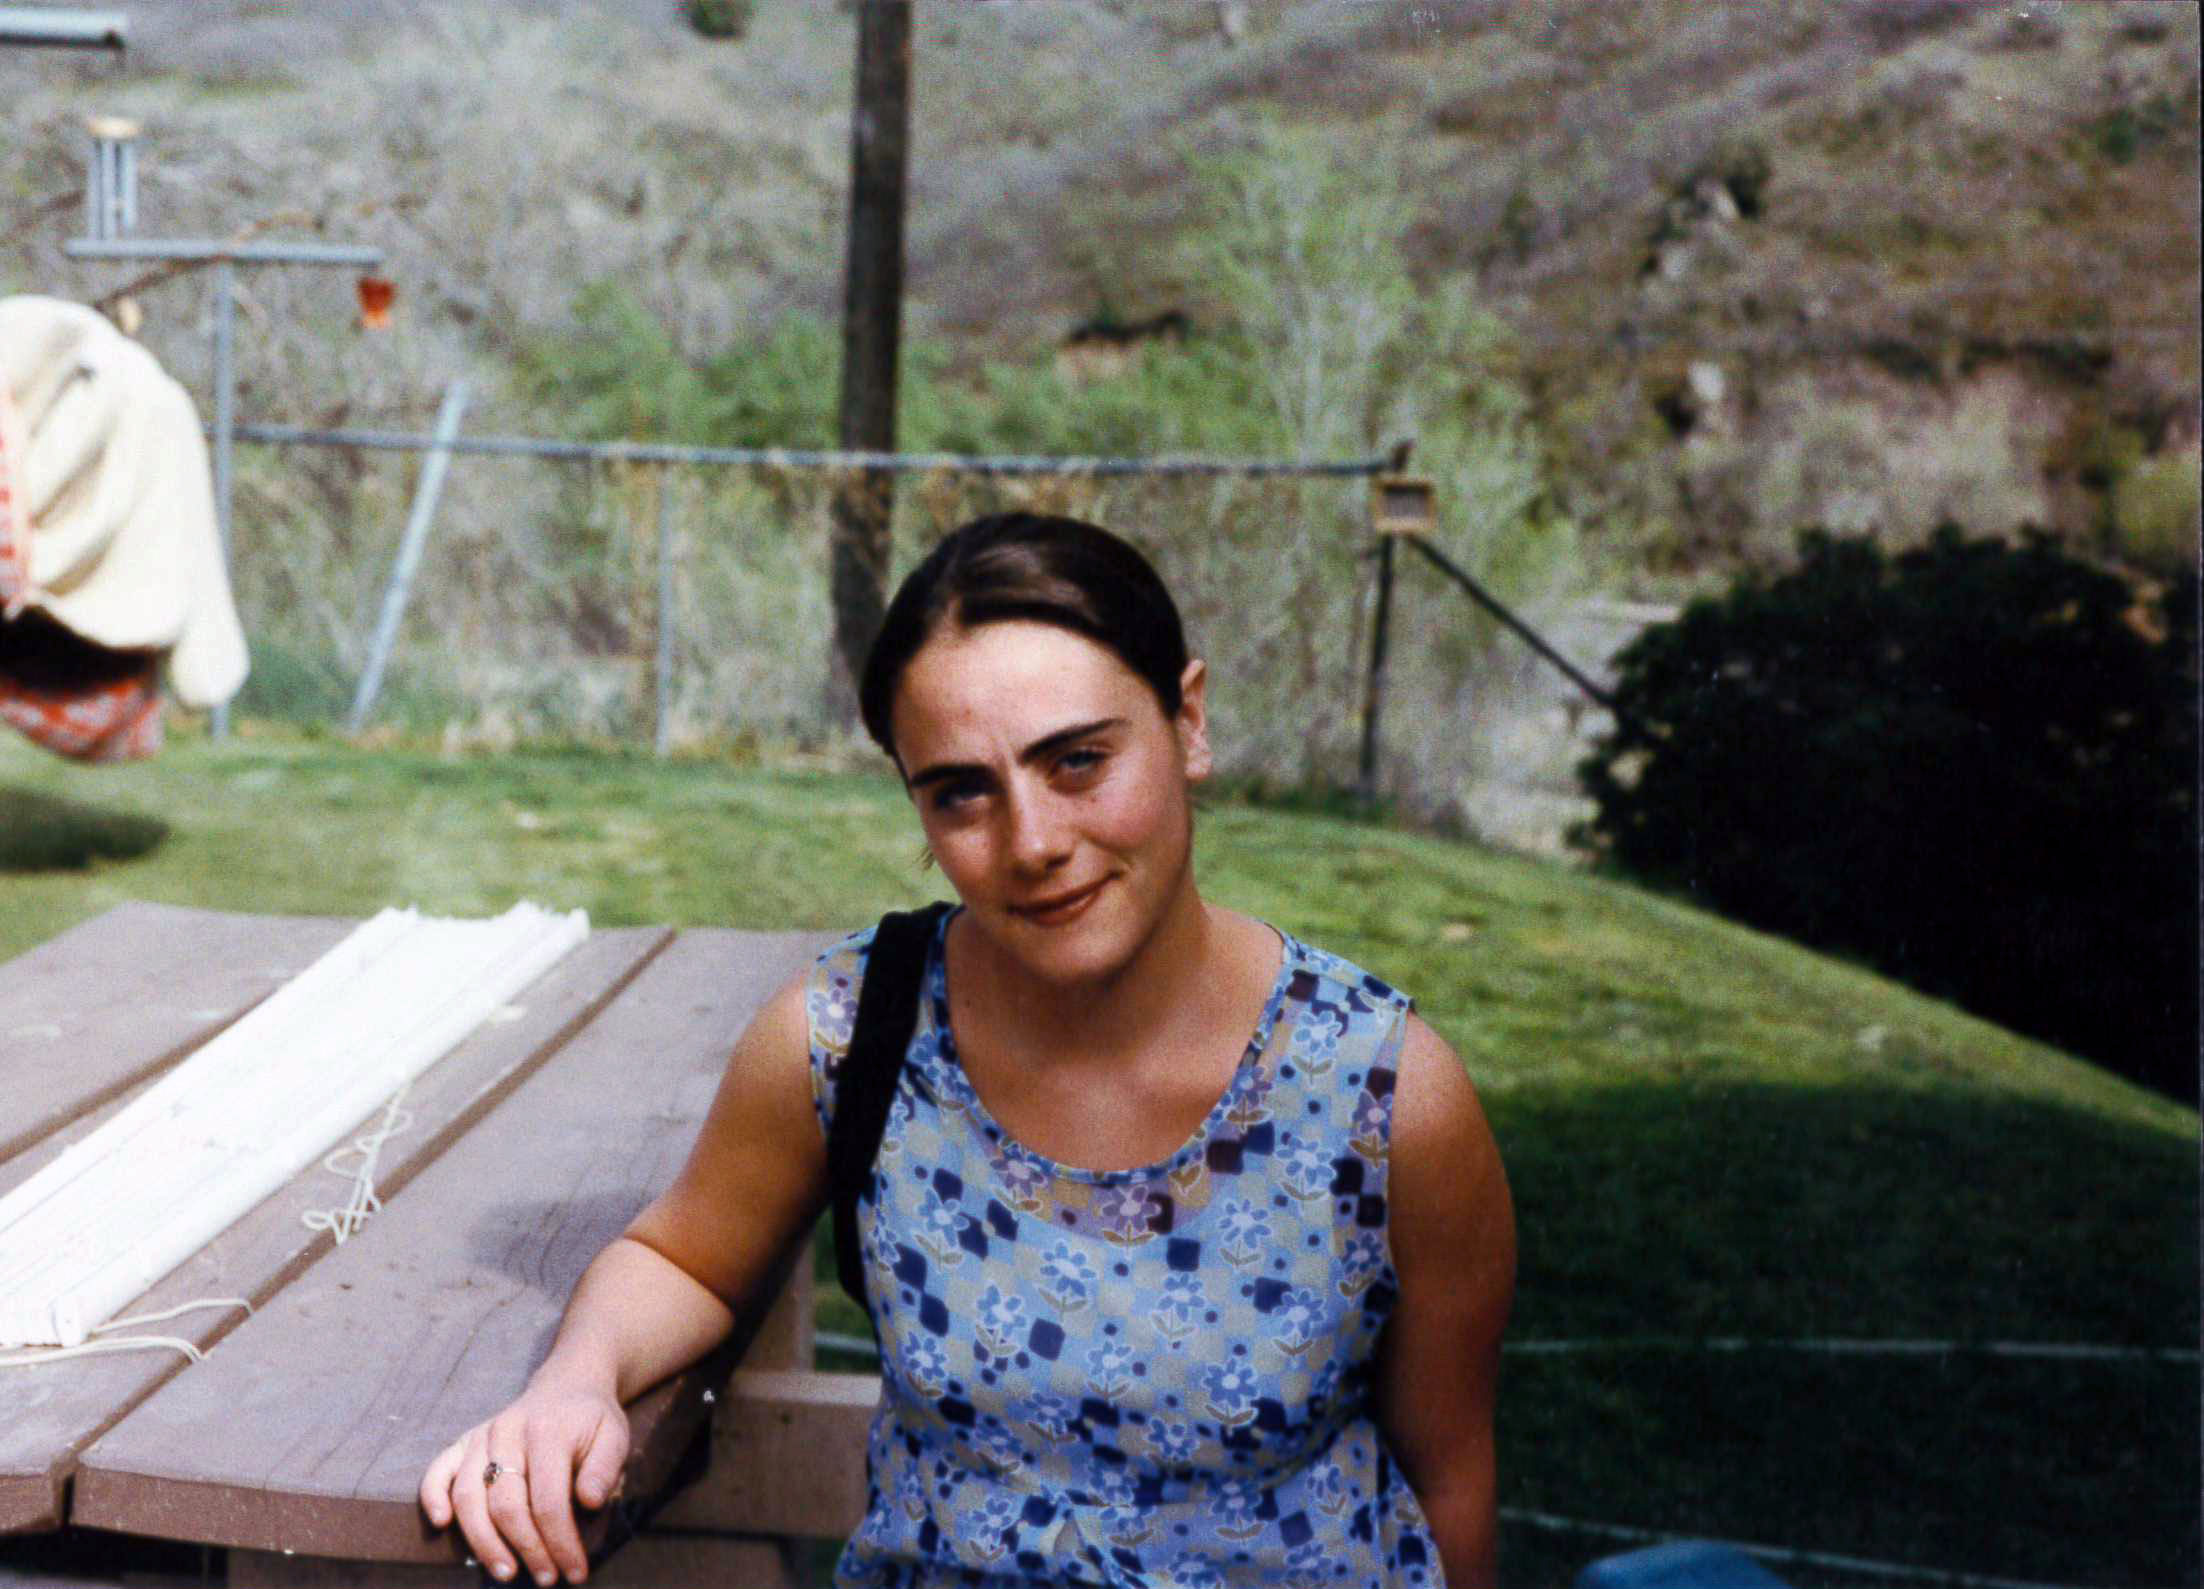 The author, pictured in summer 1996, the year of the Buffalo Creek Fire and subsequent heavy flooding. The family had to evacuate the canyon for a short time while father worked day and night with the other caretakers to remove debris in Strontia Springs Reservoir.